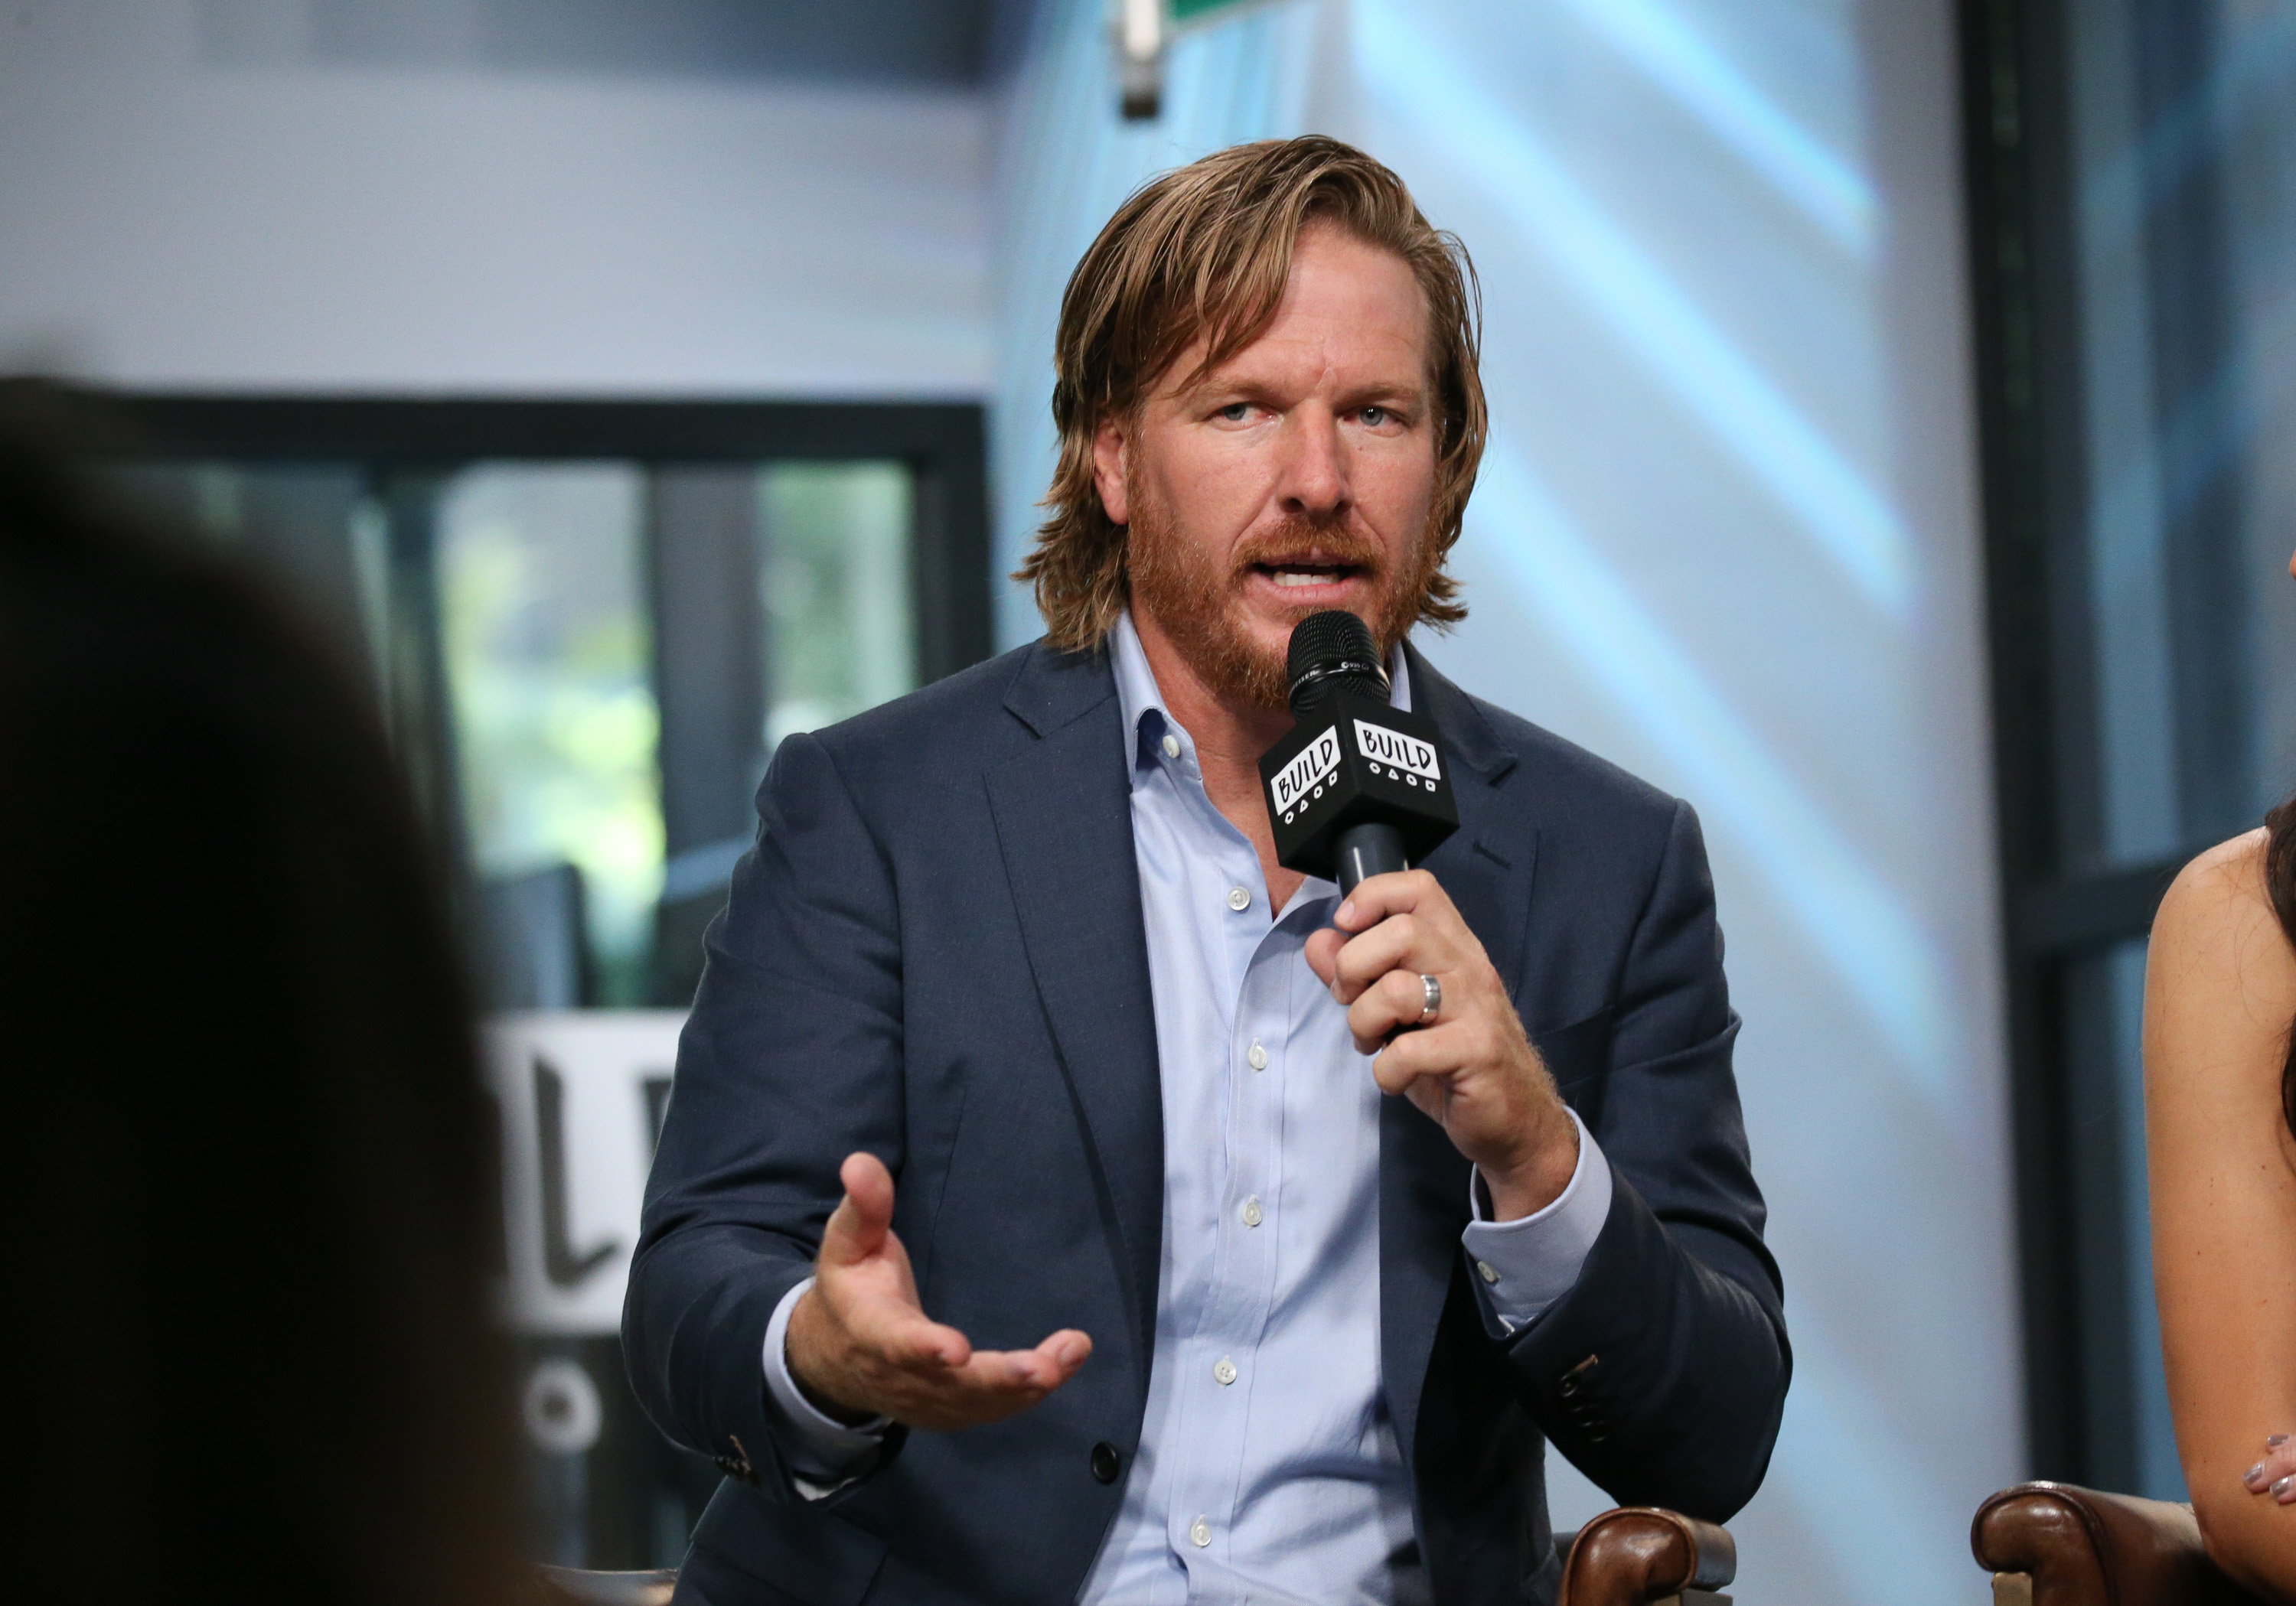 Fixer Upper Star Chip Gaines Warns: Don't Make This Mistake When Buying a Home